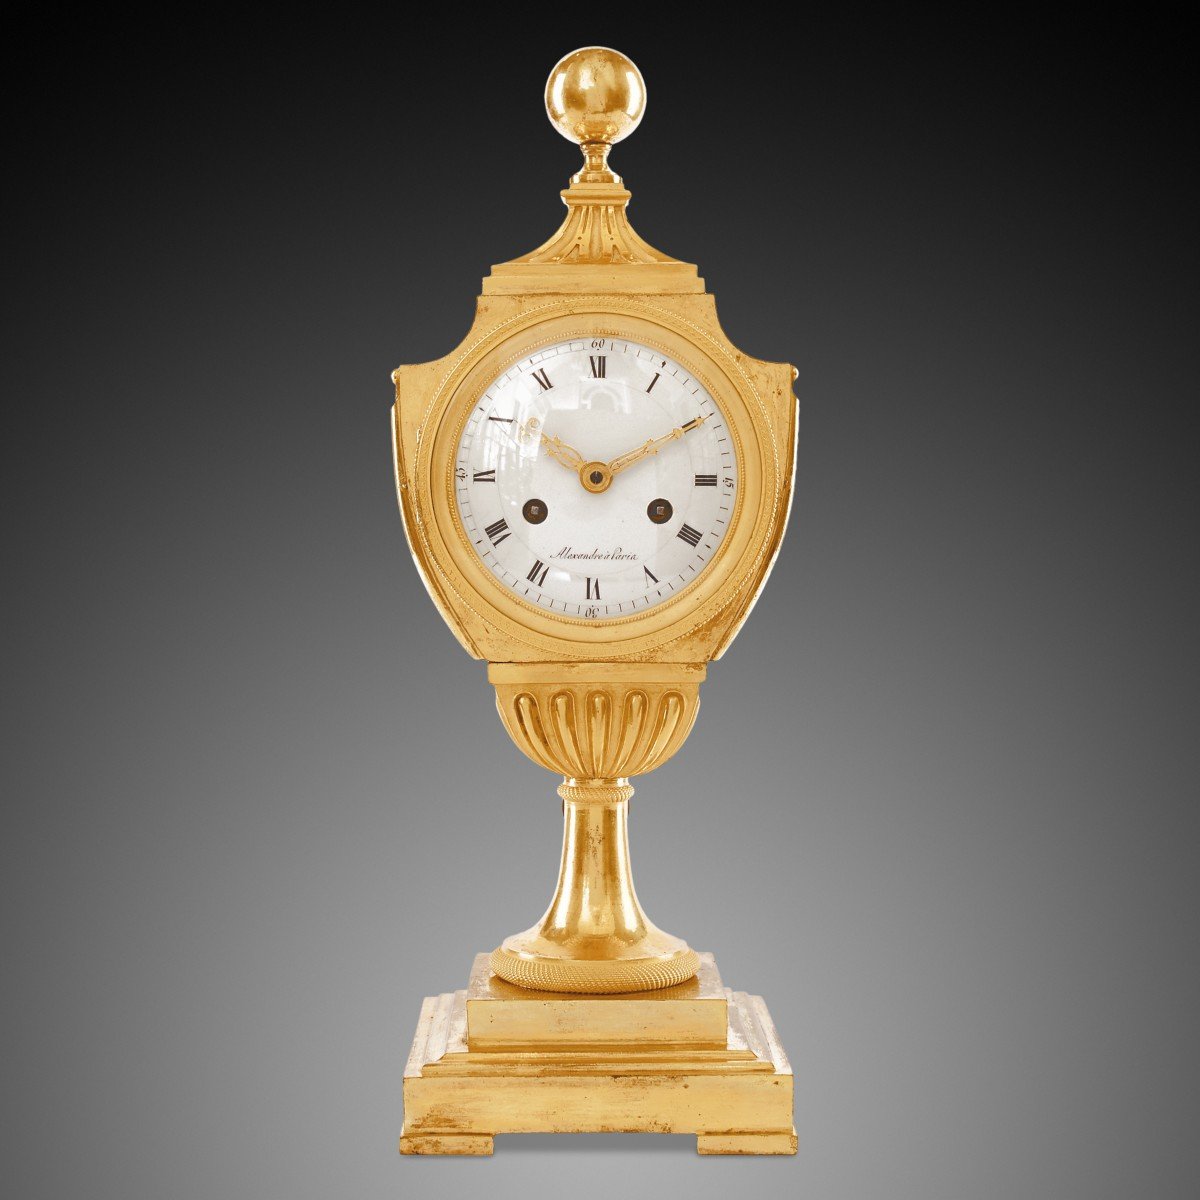 19th Century Empire Style Mantel Clock By Alexandre In Paris.